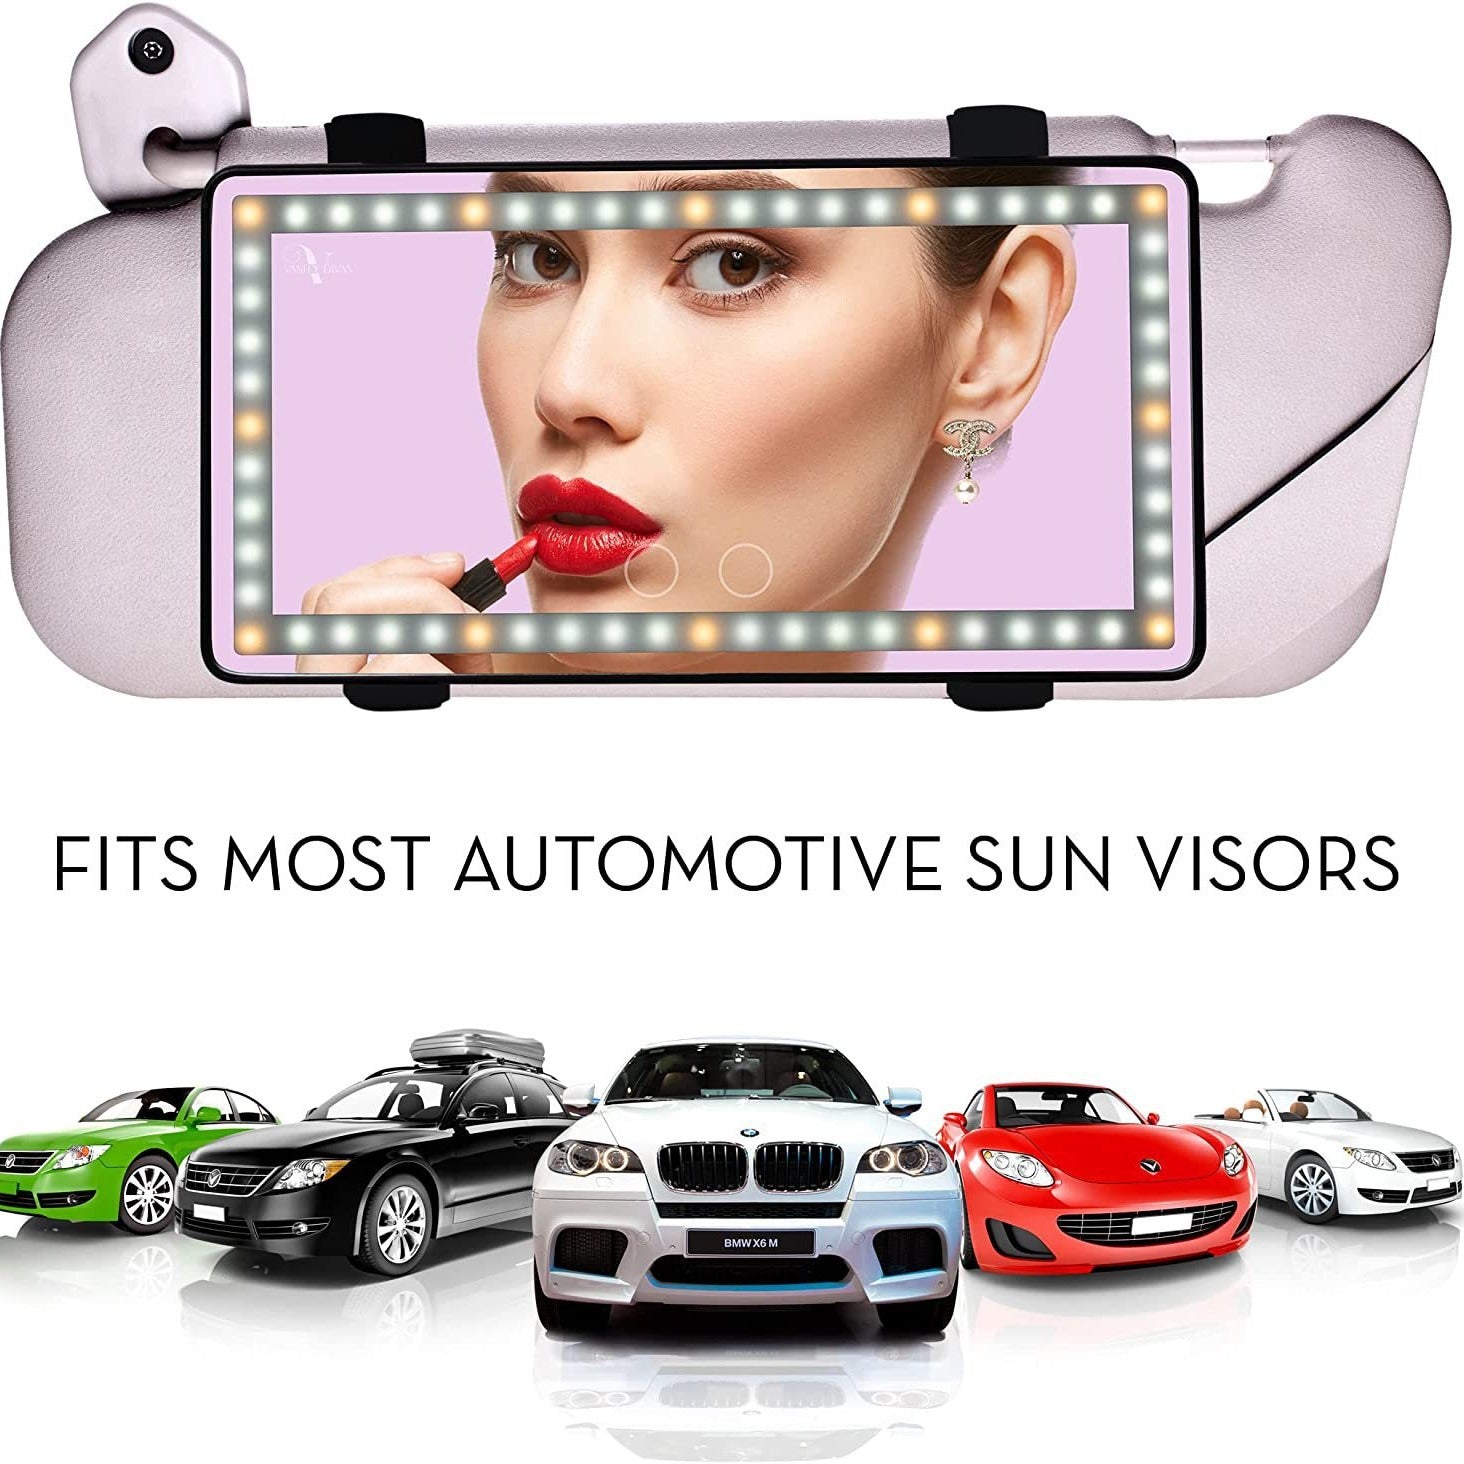 LED makeup mirror car beauty mirror touch dimming three-color light mirror HD car sun visor rearview mirror